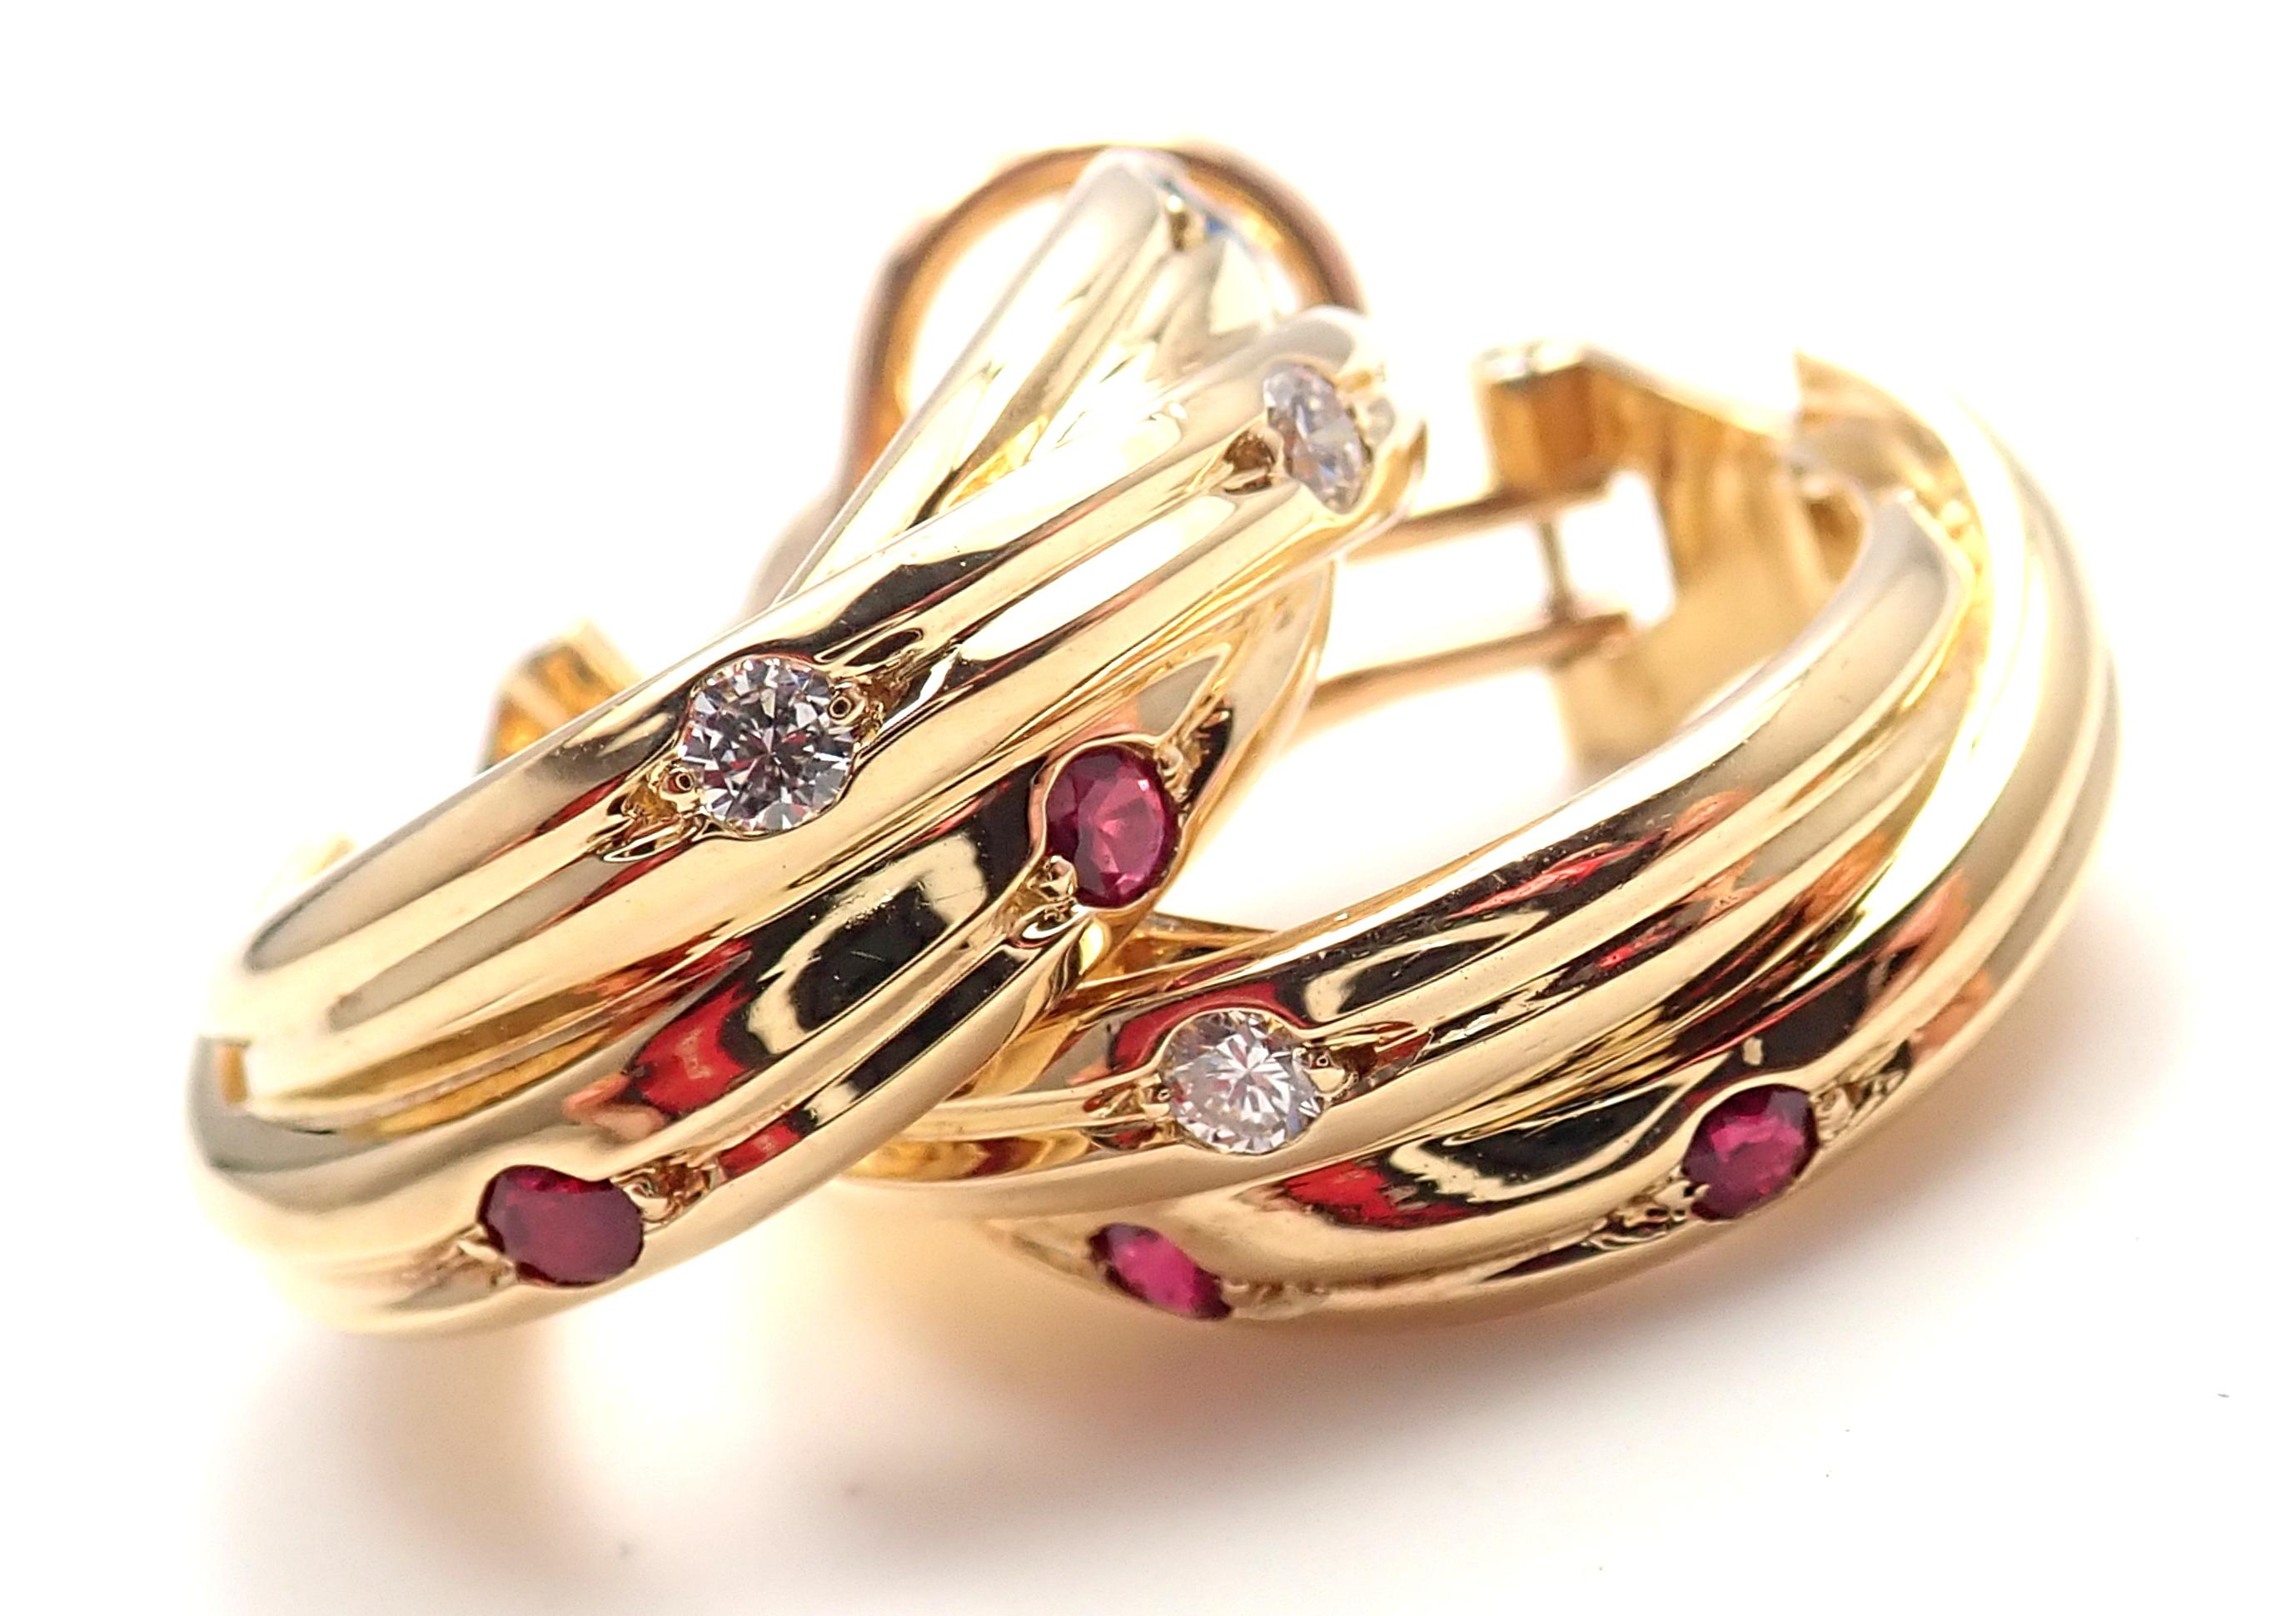 18k Yellow Gold Trinity Diamonds Sapphires Rubies Hoop Earrings by Cartier.
With 4 round brilliant cut diamonds total weigt approx. .16ct
4 rubies, 2 sapphires
These earrings are for pierced ears.
Details: 
Measurements 22mm x 7mm	
Weight: 14.1